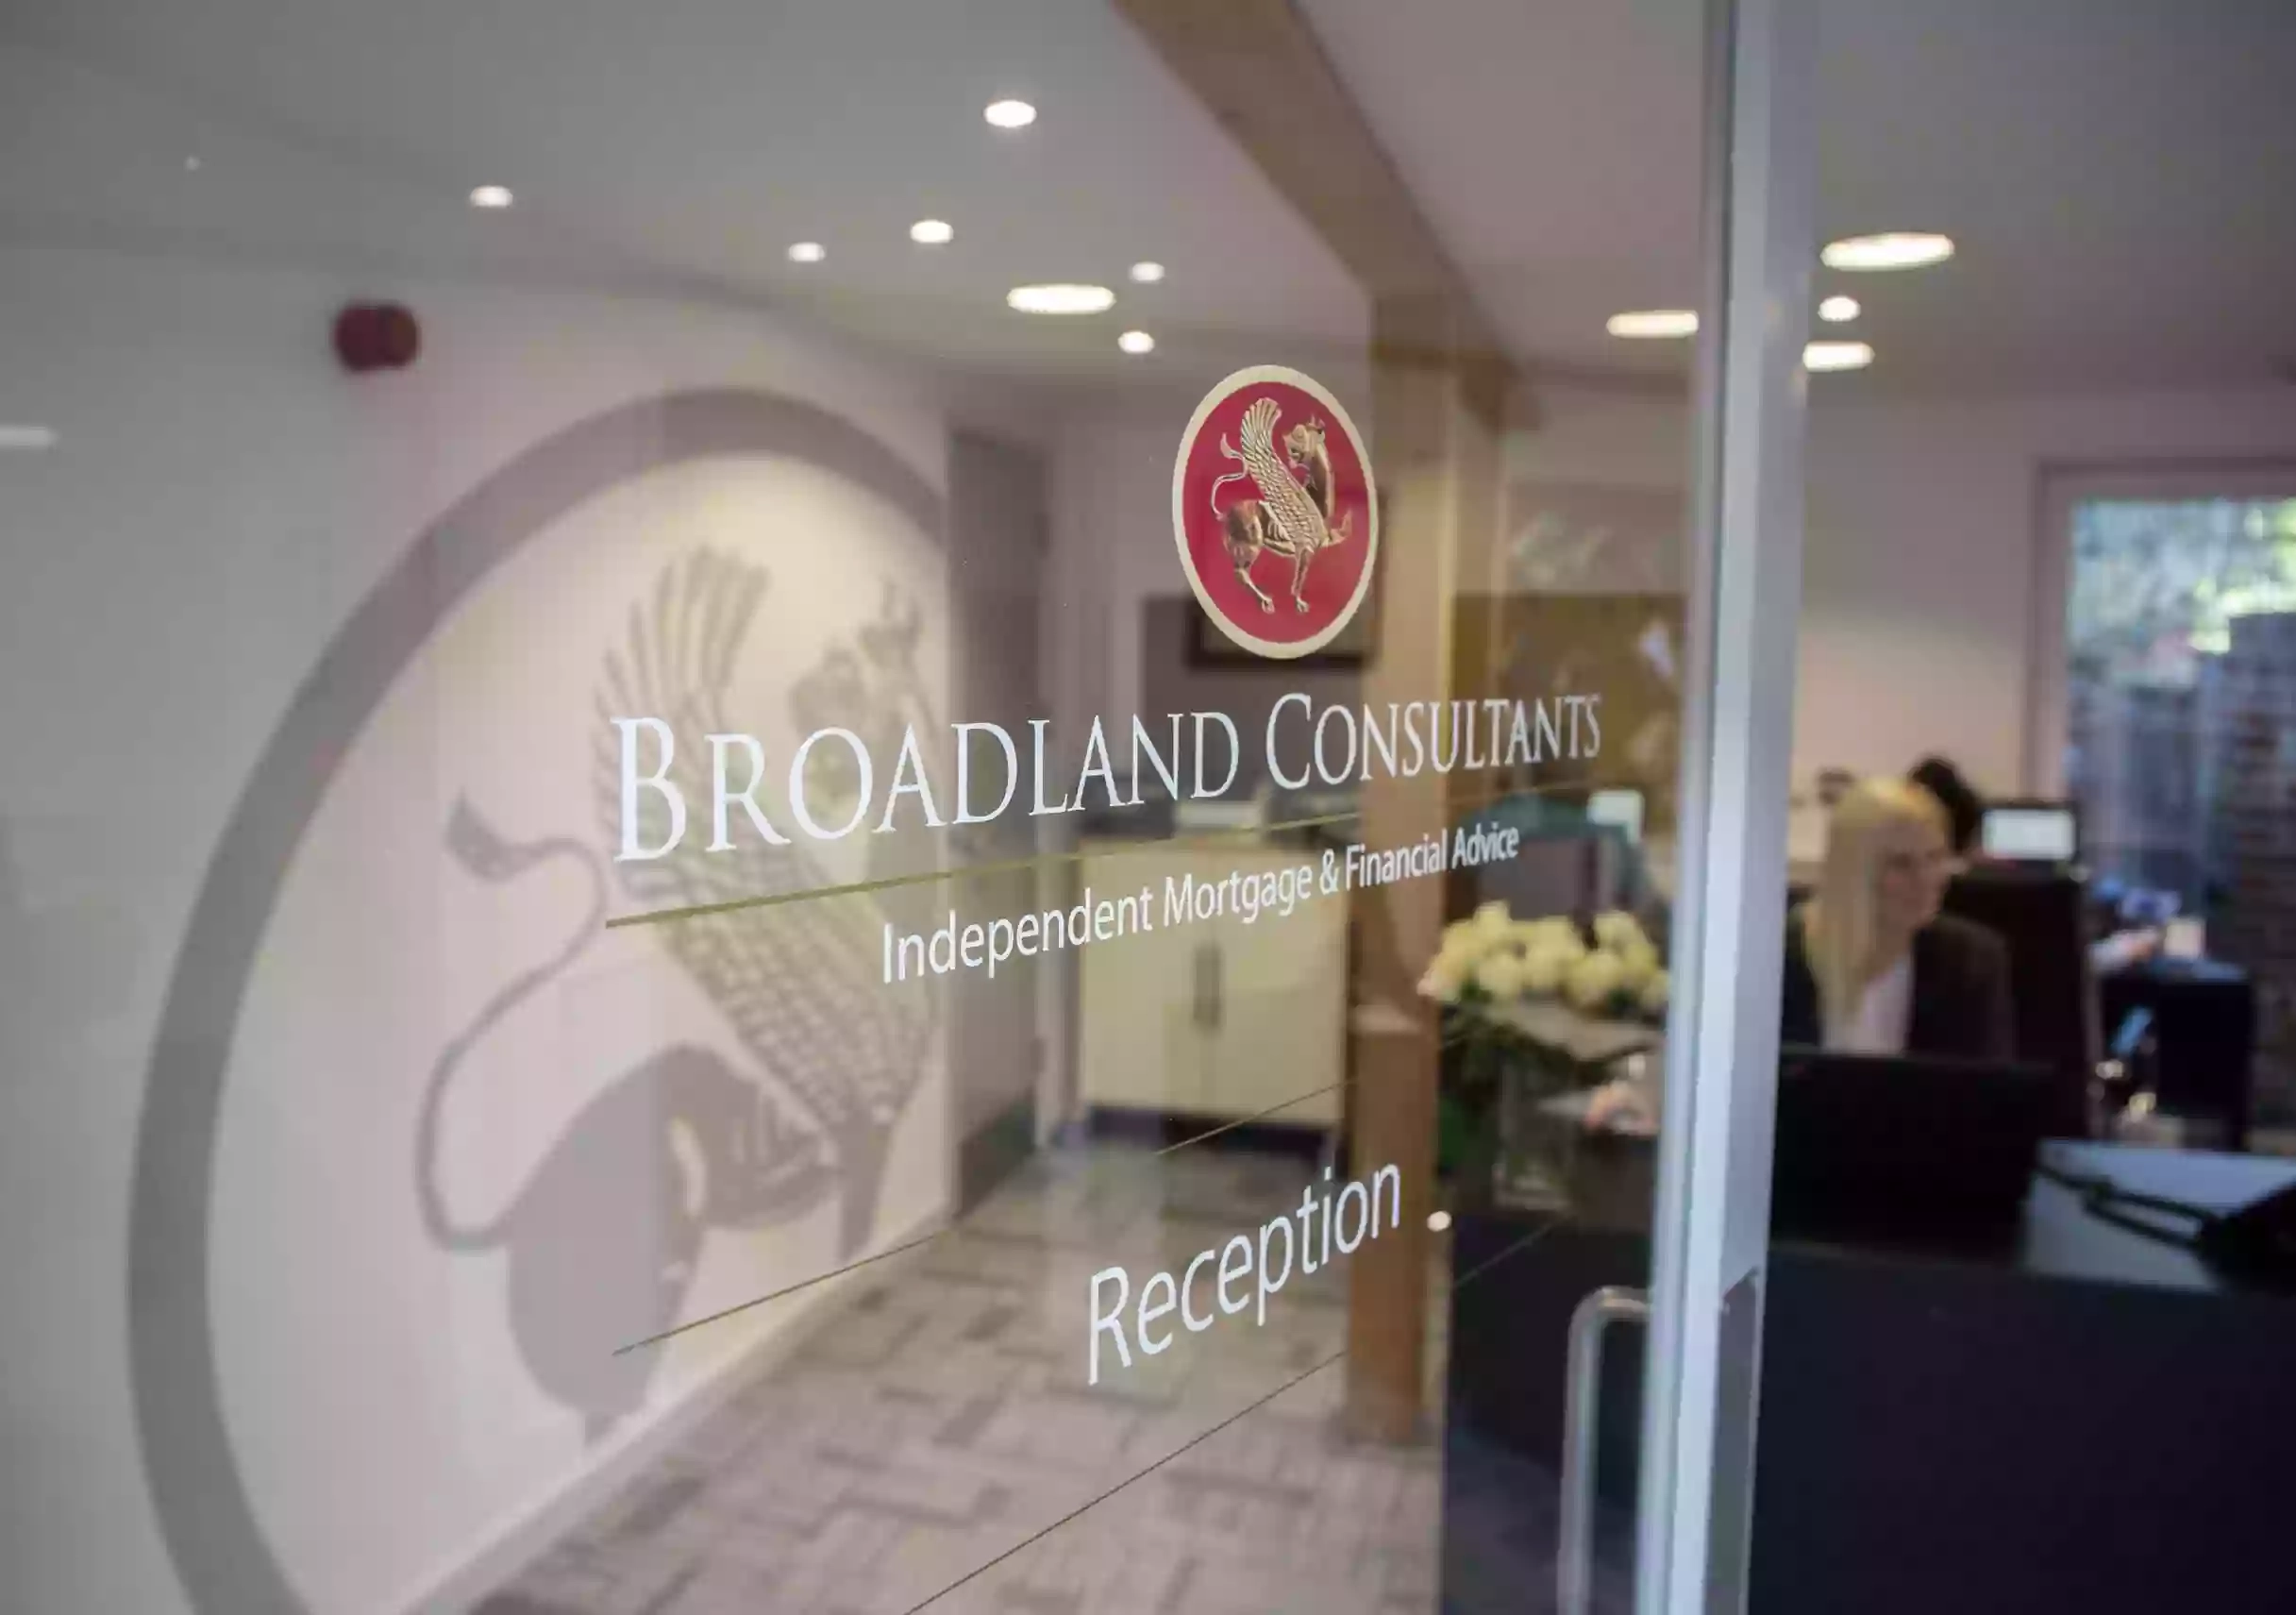 Broadland Consultants Limited - Independent Mortgage & Financial Advisers